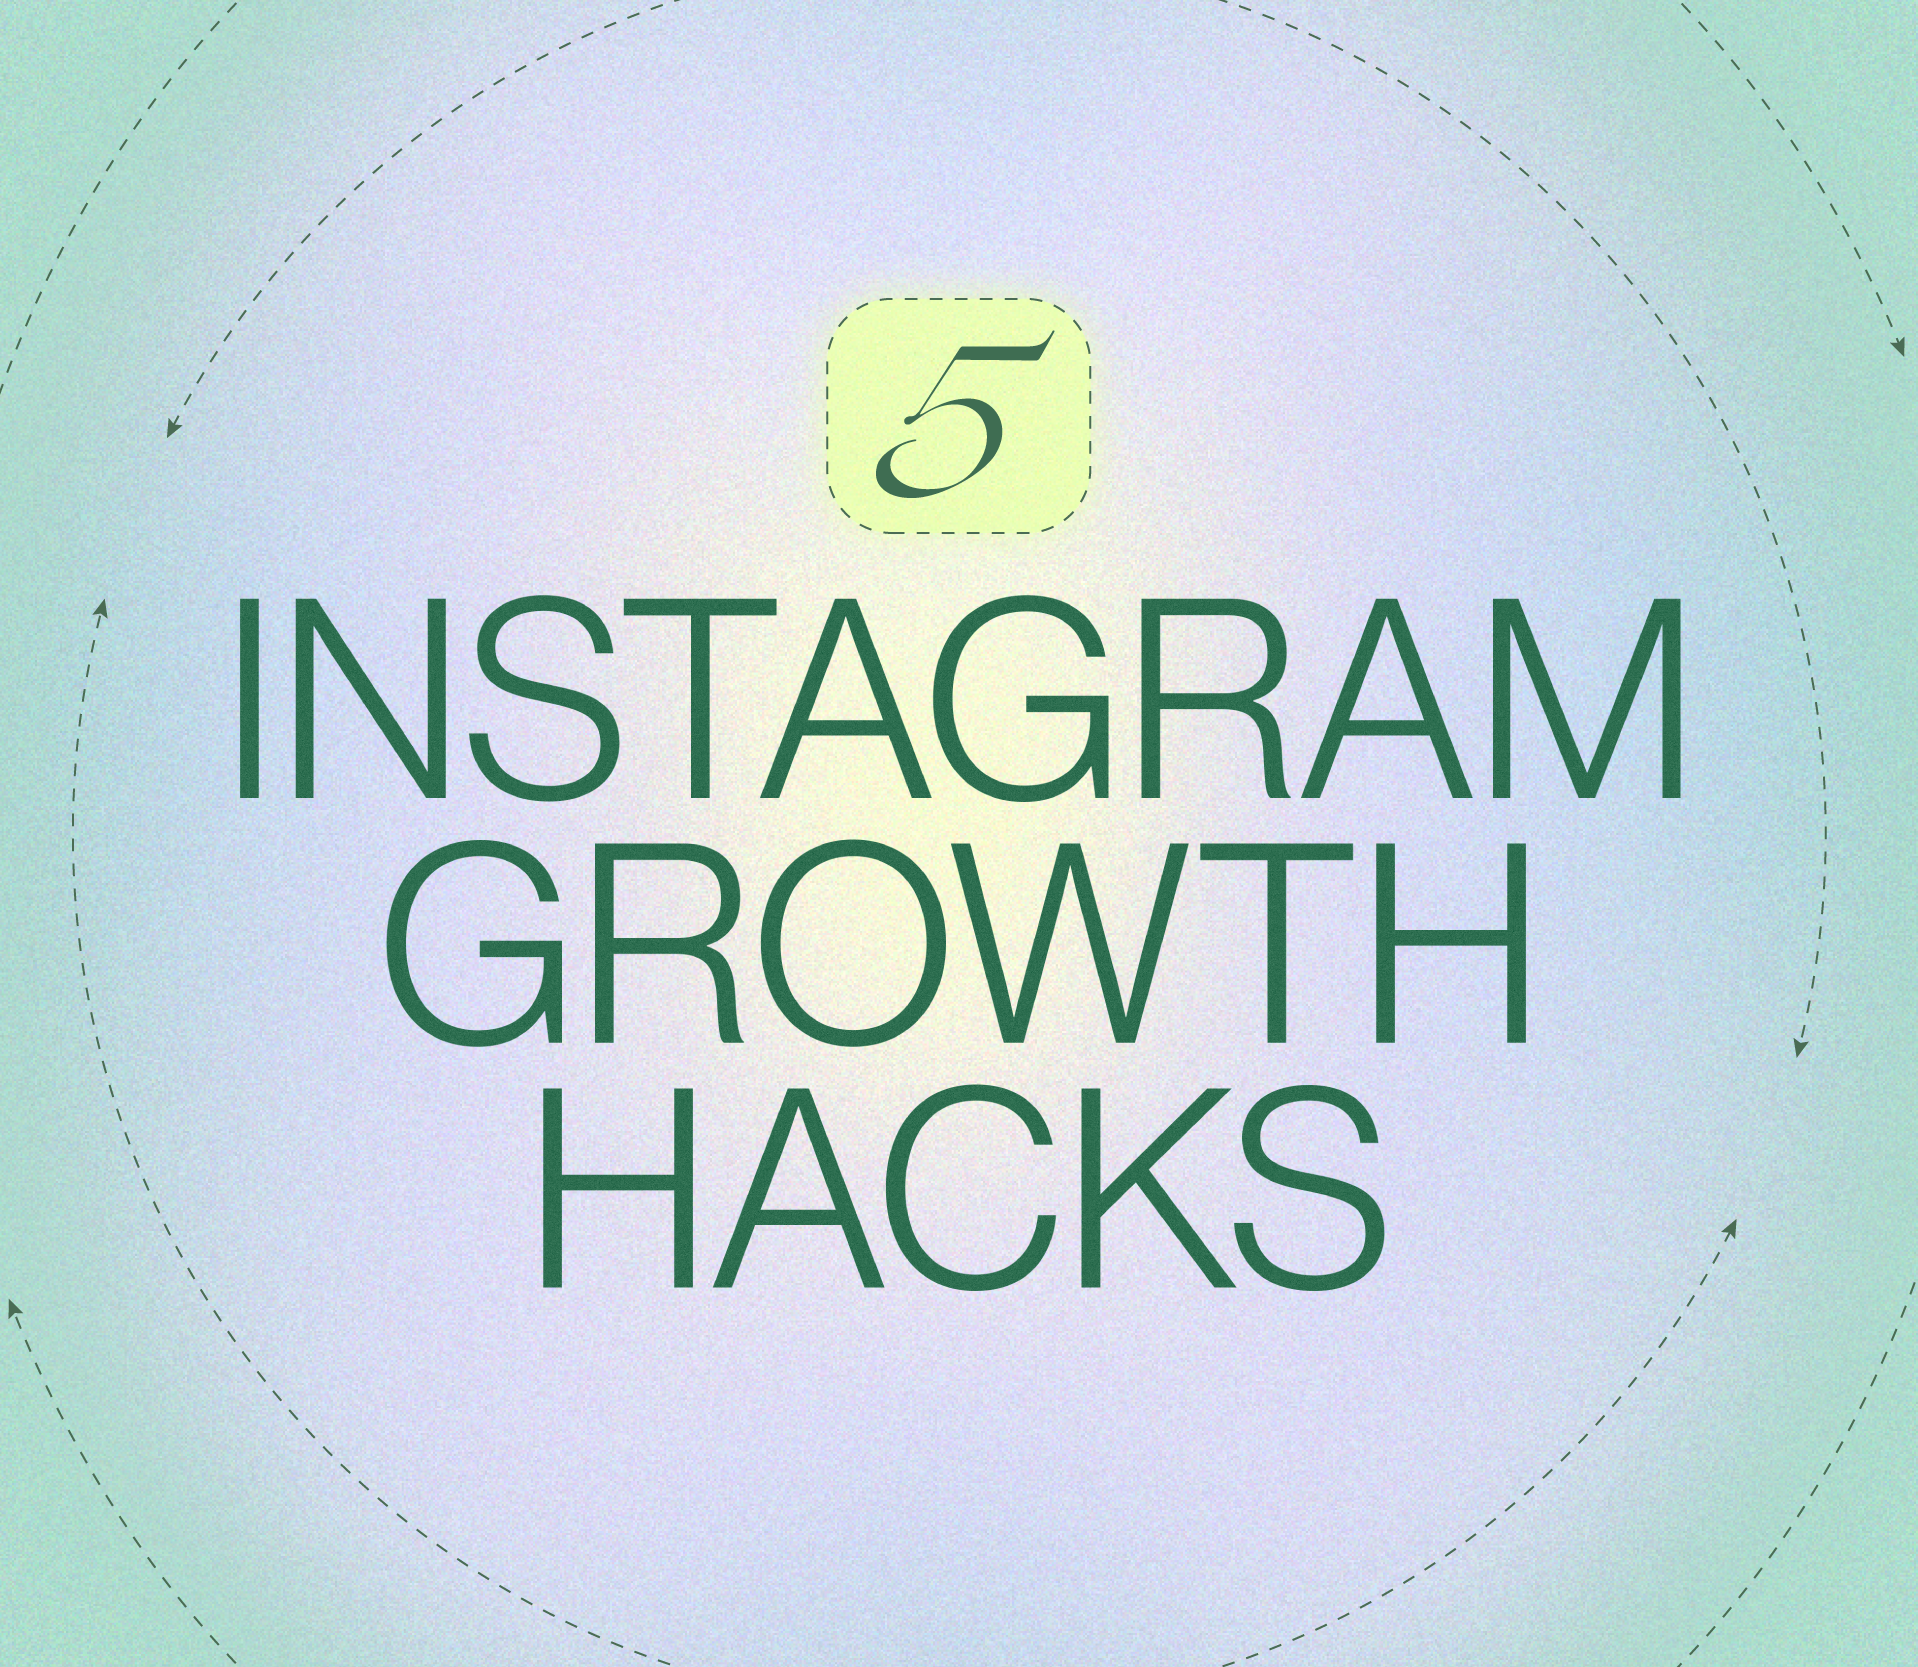 47 Instagram Hacks Every Marketer Needs to Know